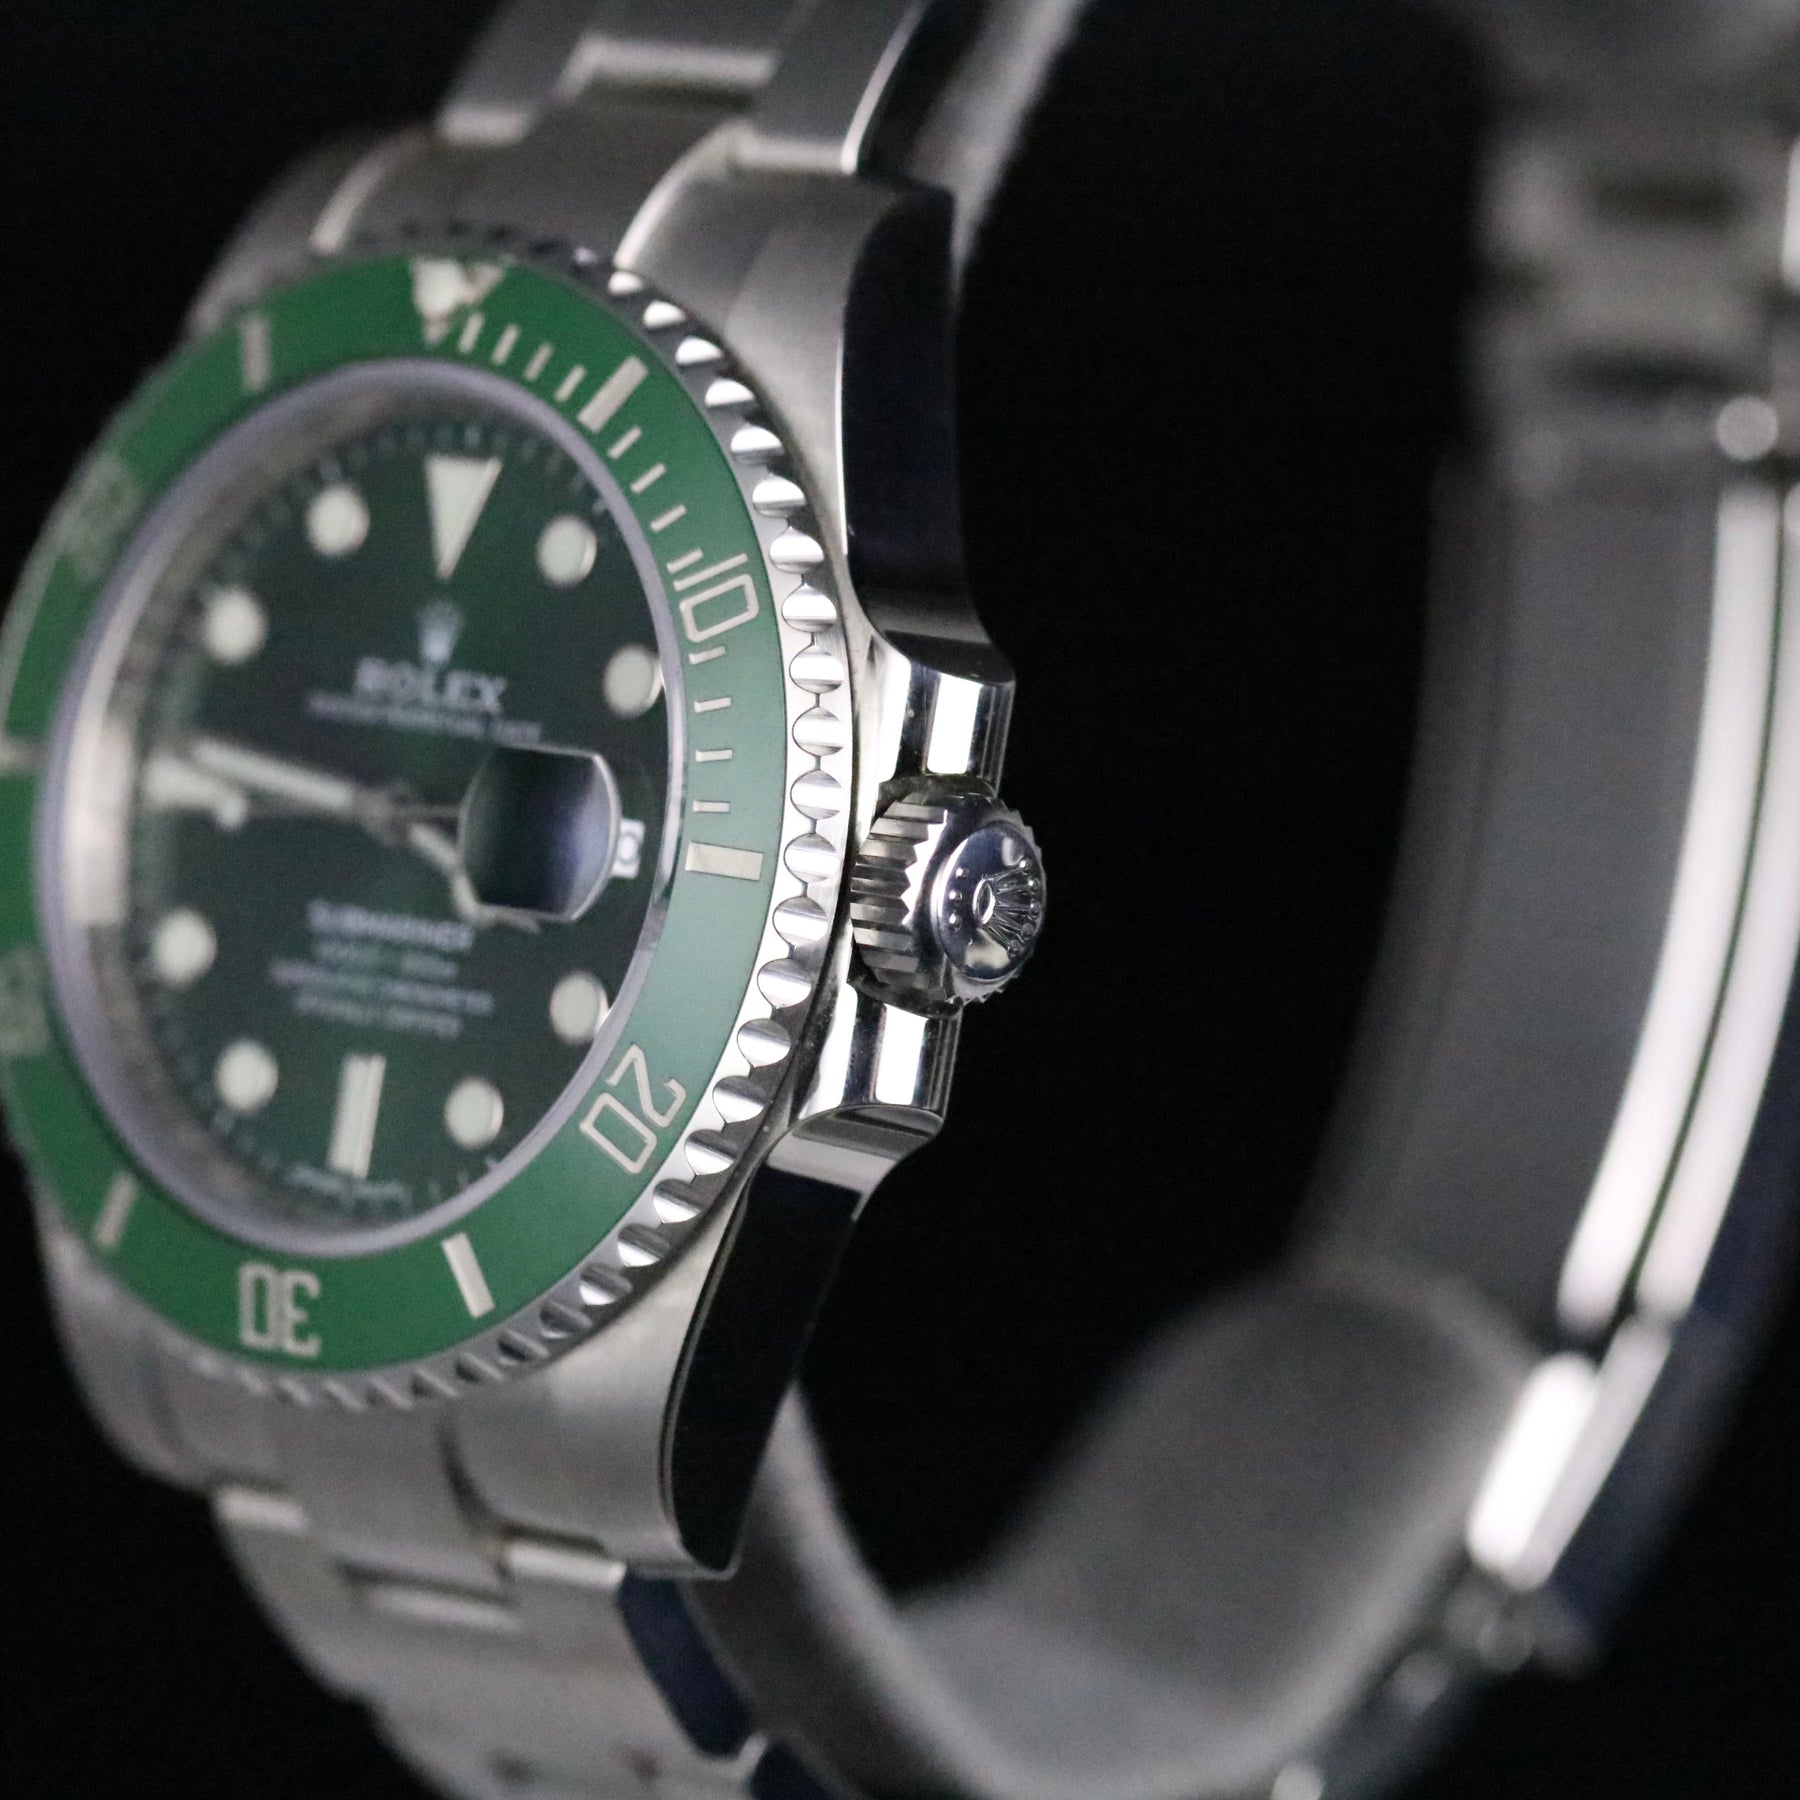 2019 Rolex 116610LV Green Submariner "Hulk" with Box & Papers